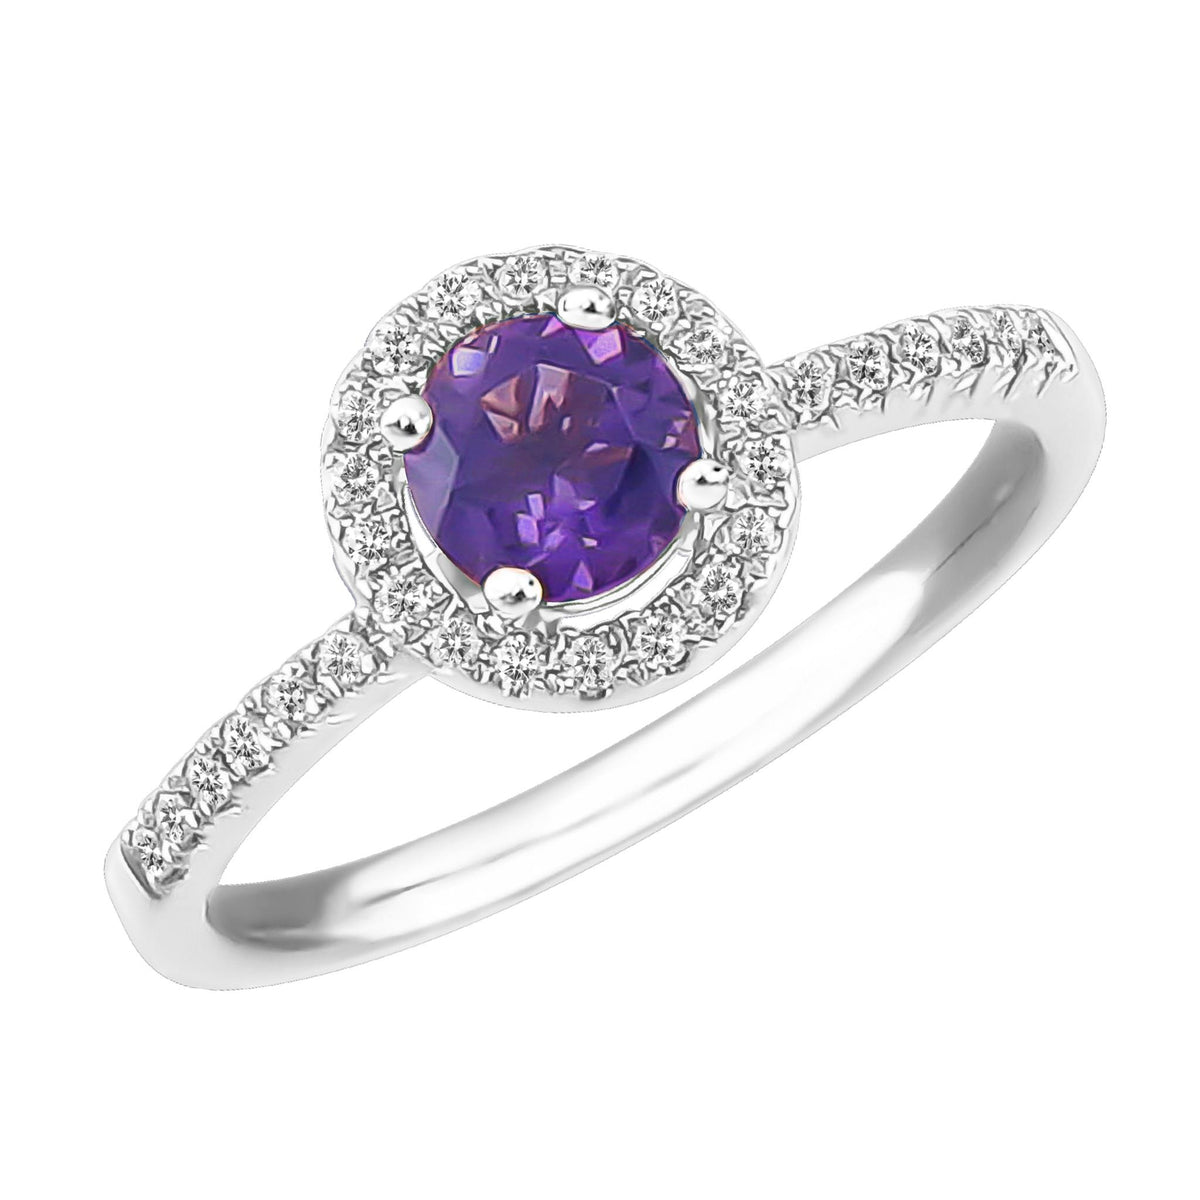 14Kt White Gold Halo Gemstone Ring With 0.41ct Amethyst